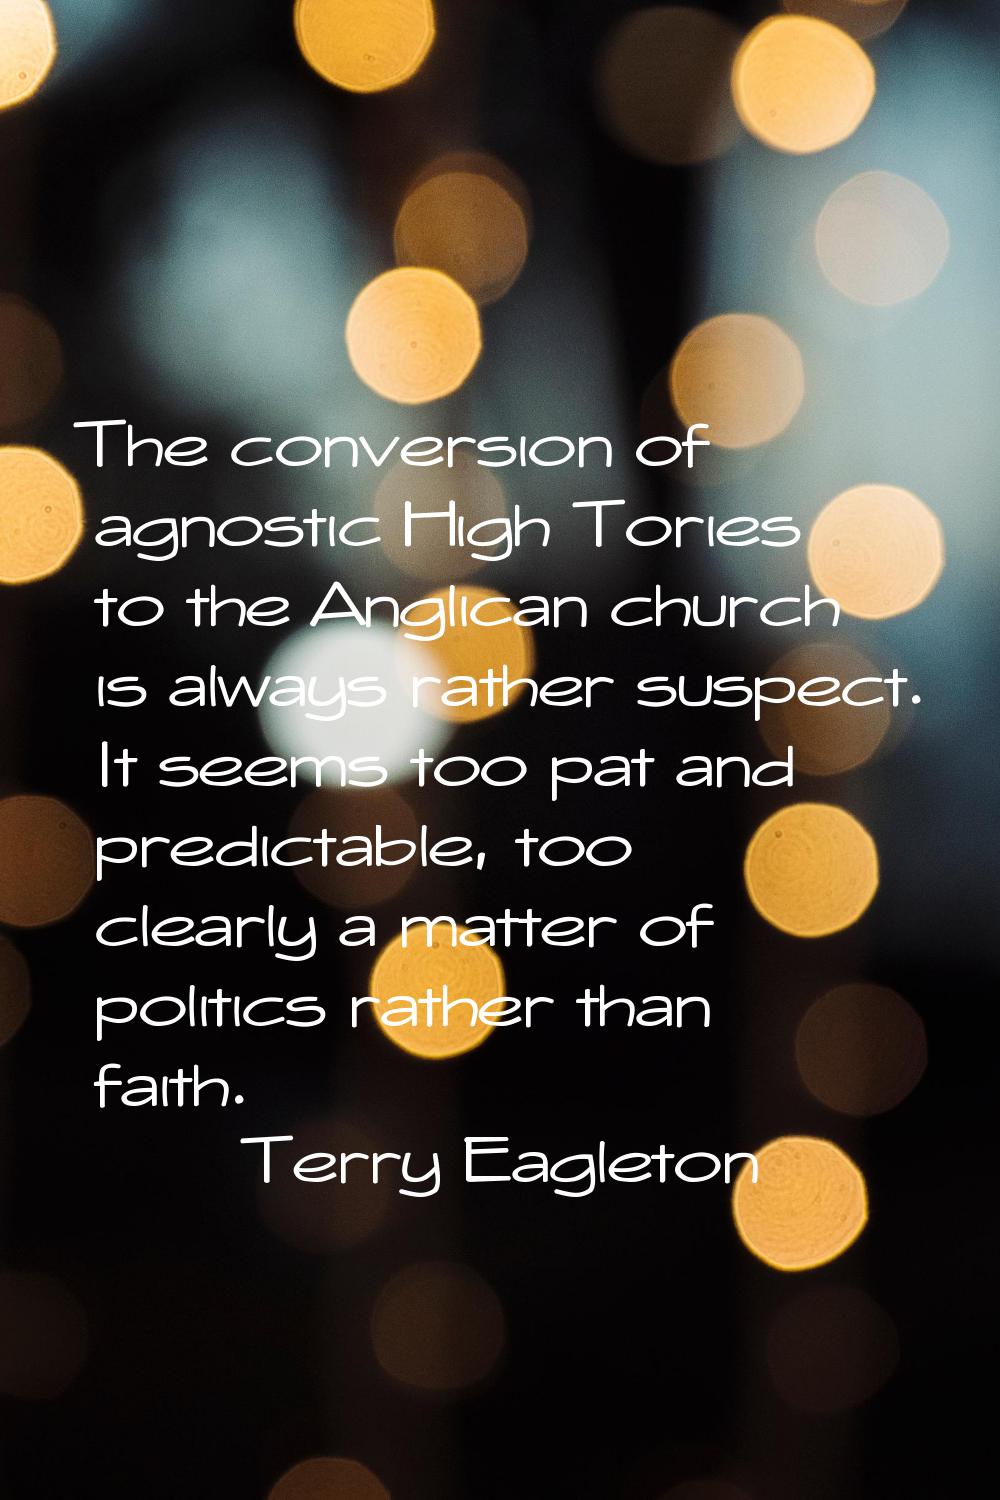 The conversion of agnostic High Tories to the Anglican church is always rather suspect. It seems to